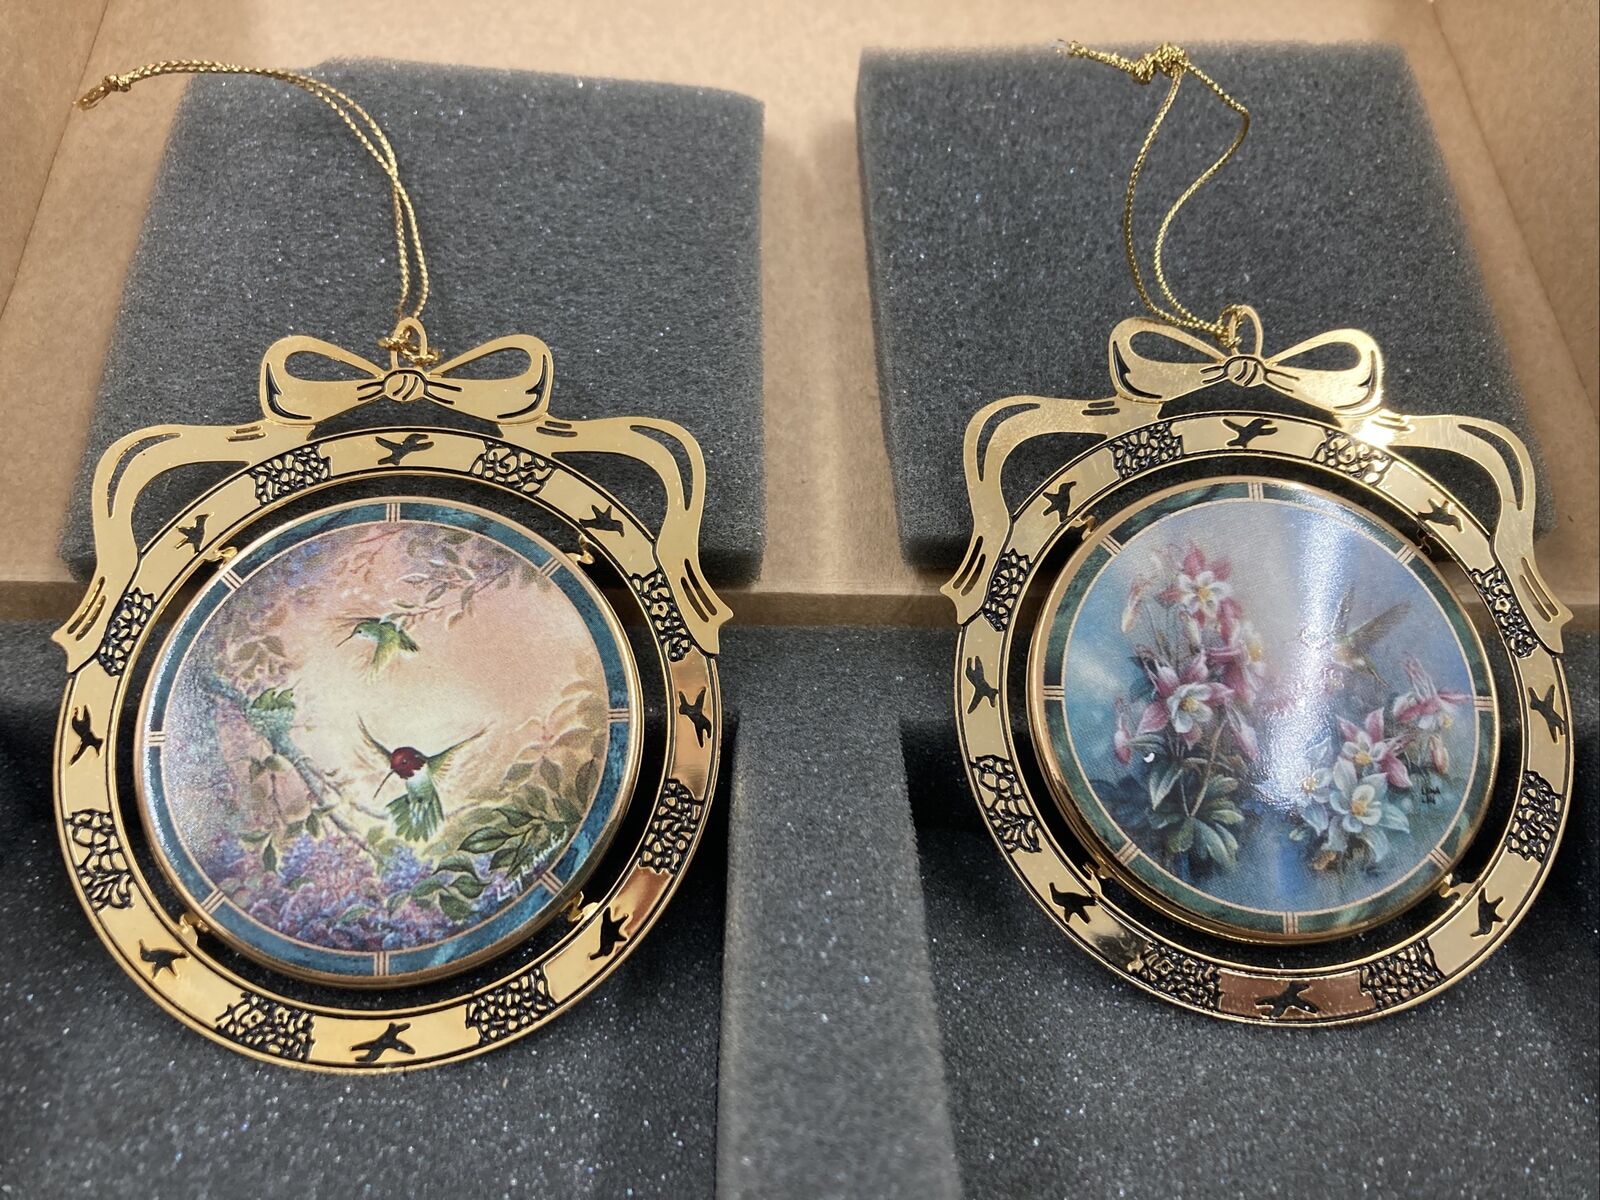 Bradford 4th And 13th Issues Of “Beautiful Hummingbirds” Ornament Collection